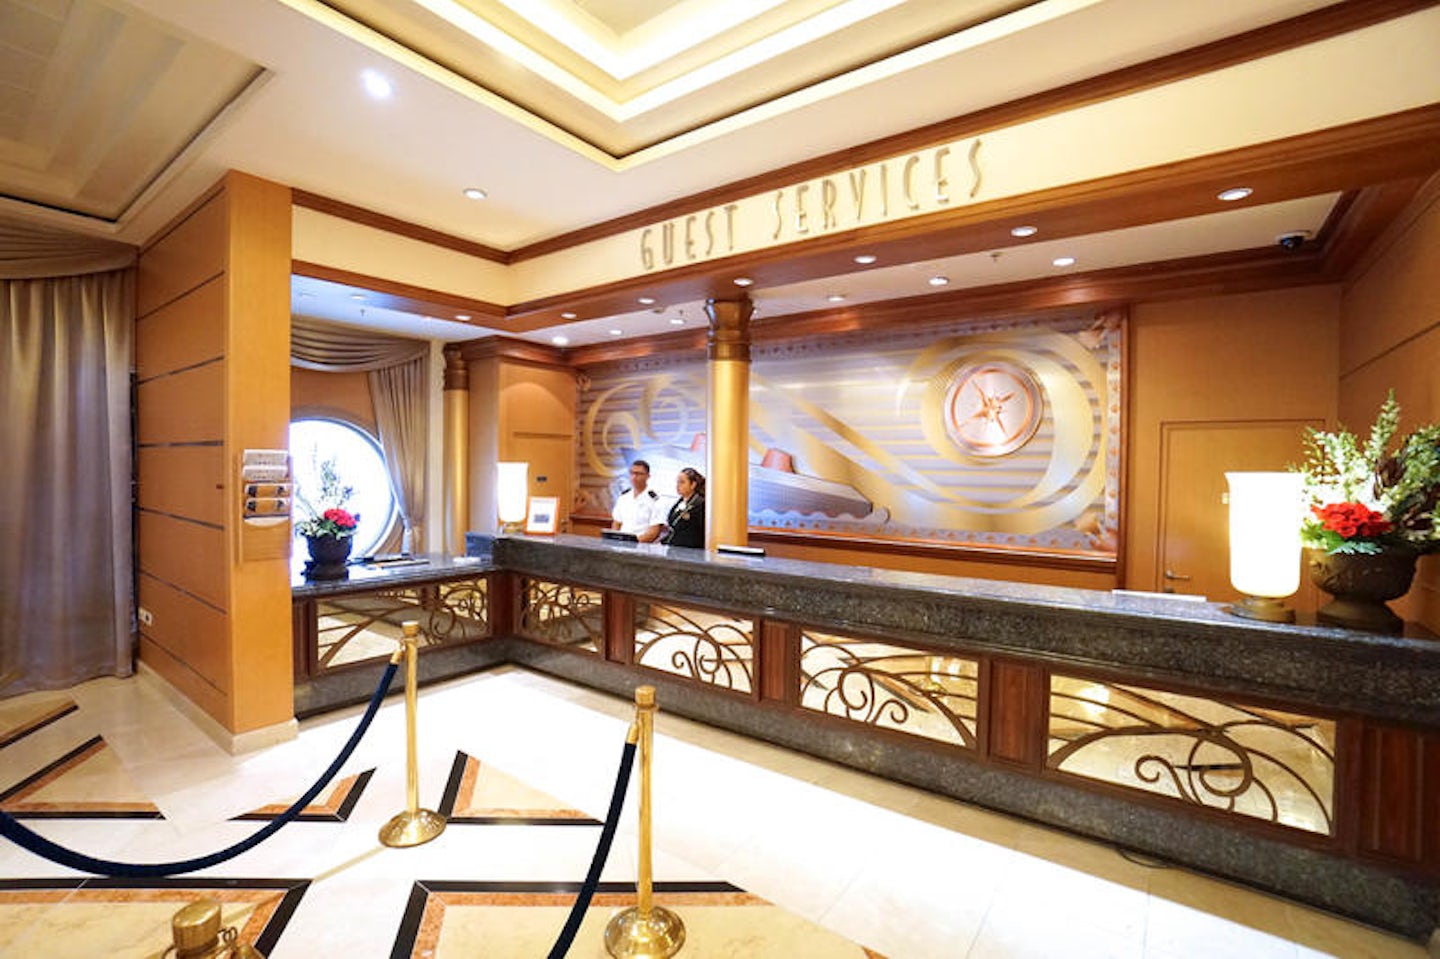 Guest Services on Disney Magic